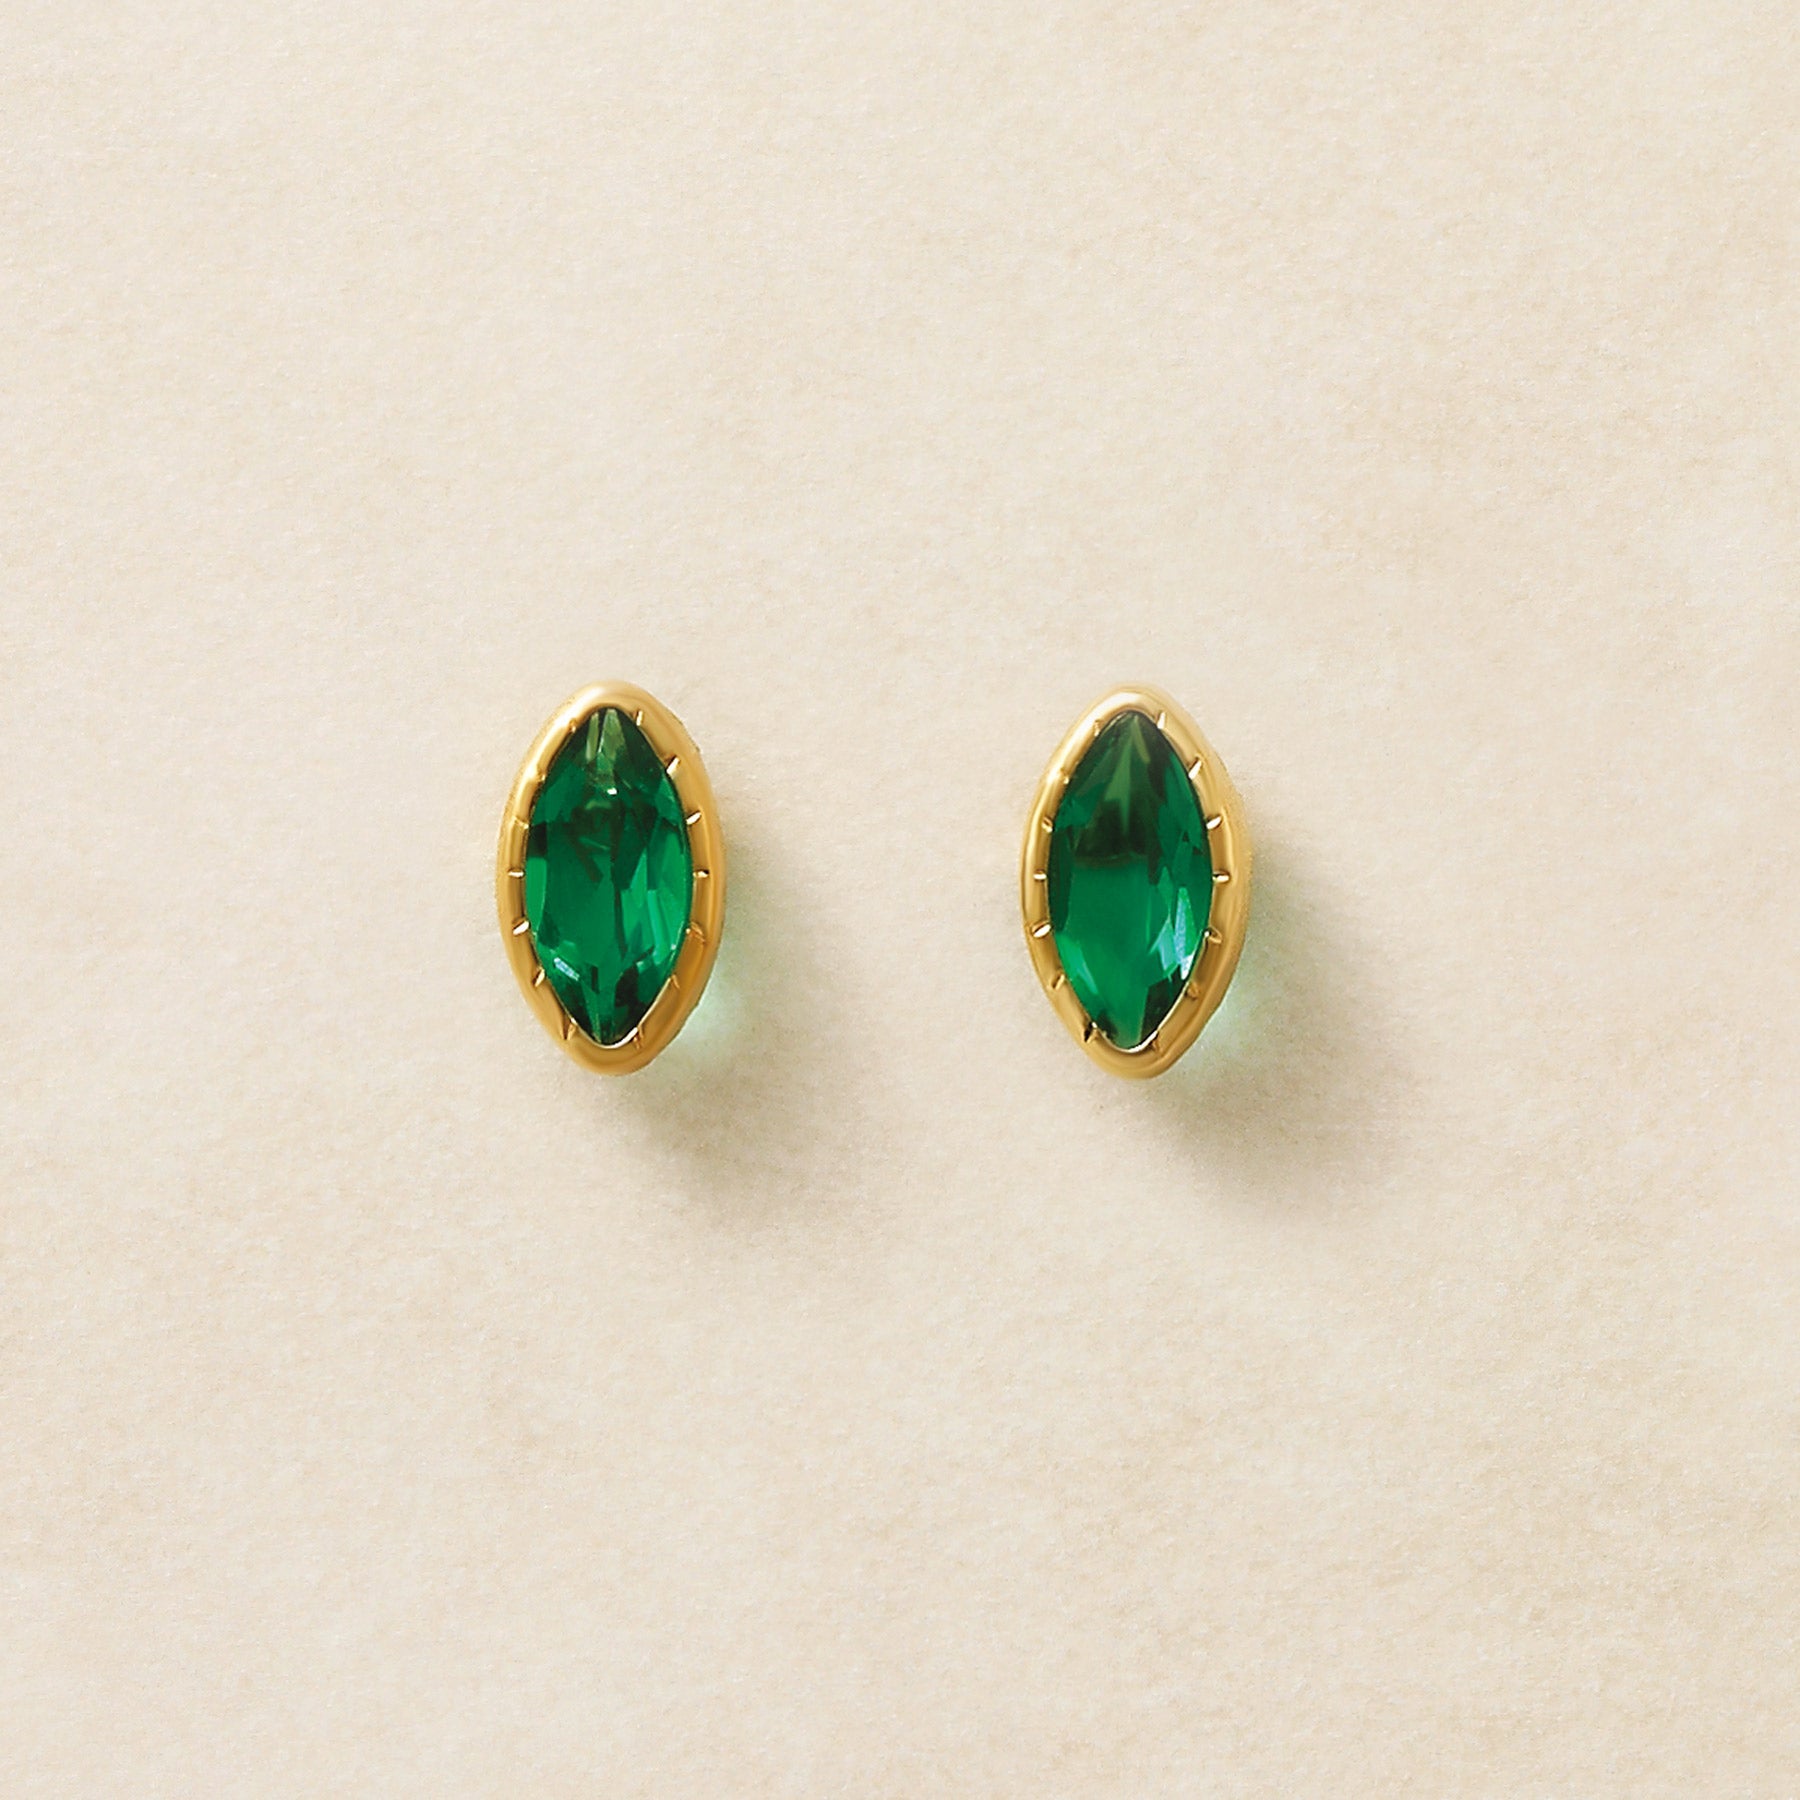 [Second Earrings] 18K Yellow Gold Green Quartz Marquise Cut Earrings - Product Image